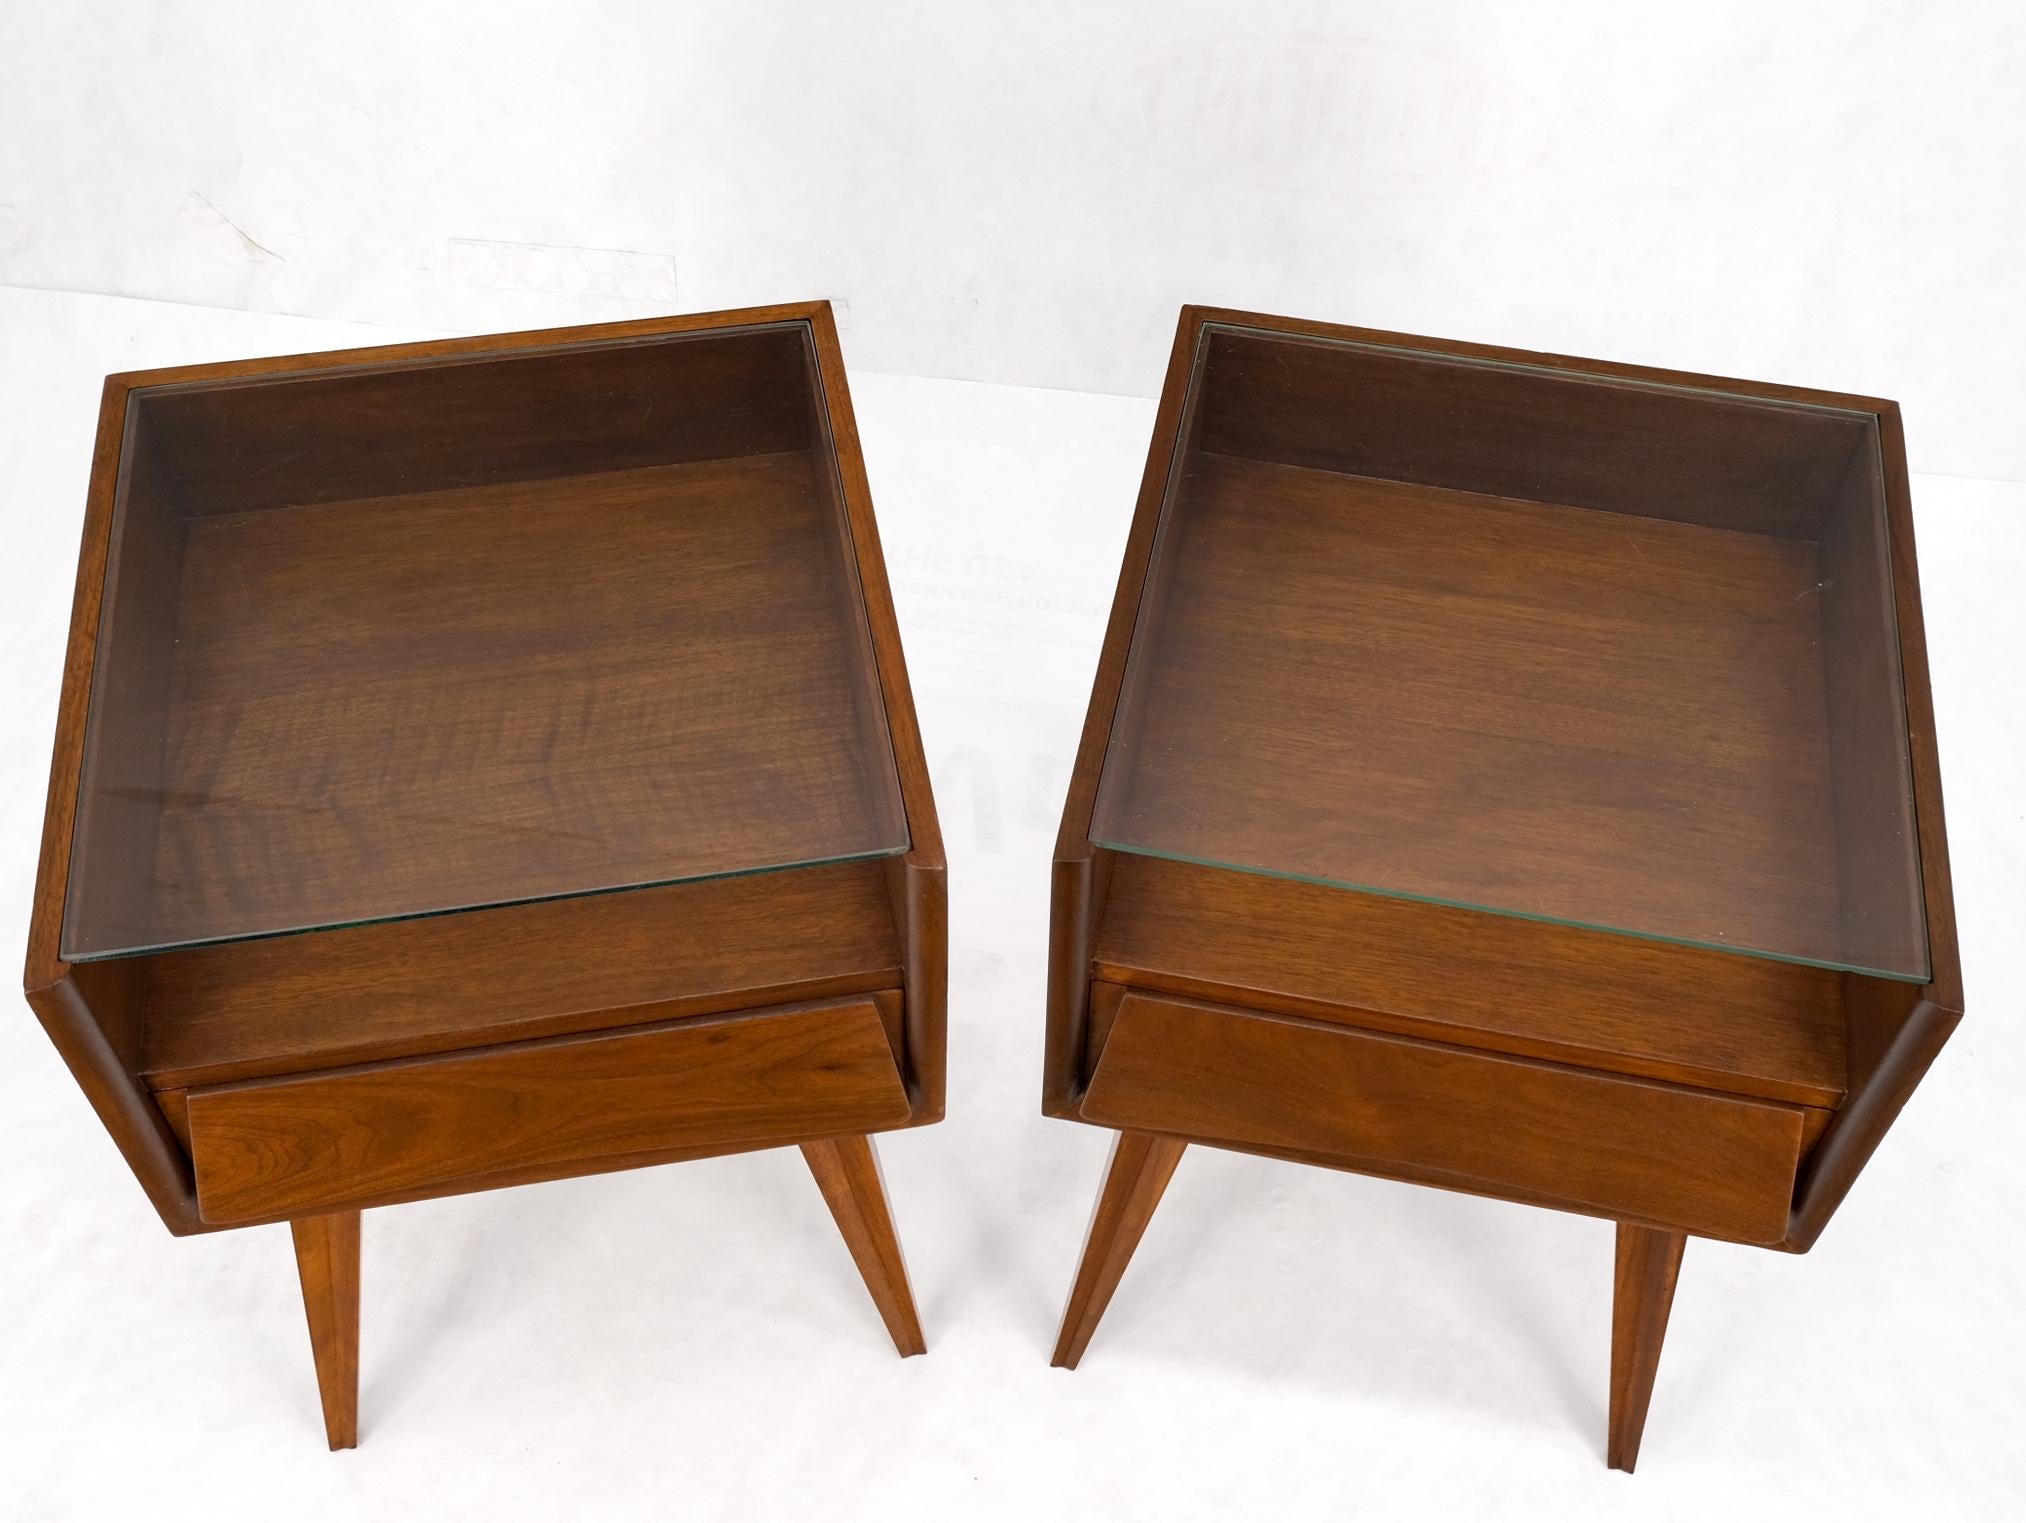 Pair Swedish Mid Century Modern Glass Top Cube Shape End Side Tables Night Stands.
Restored mint condition.